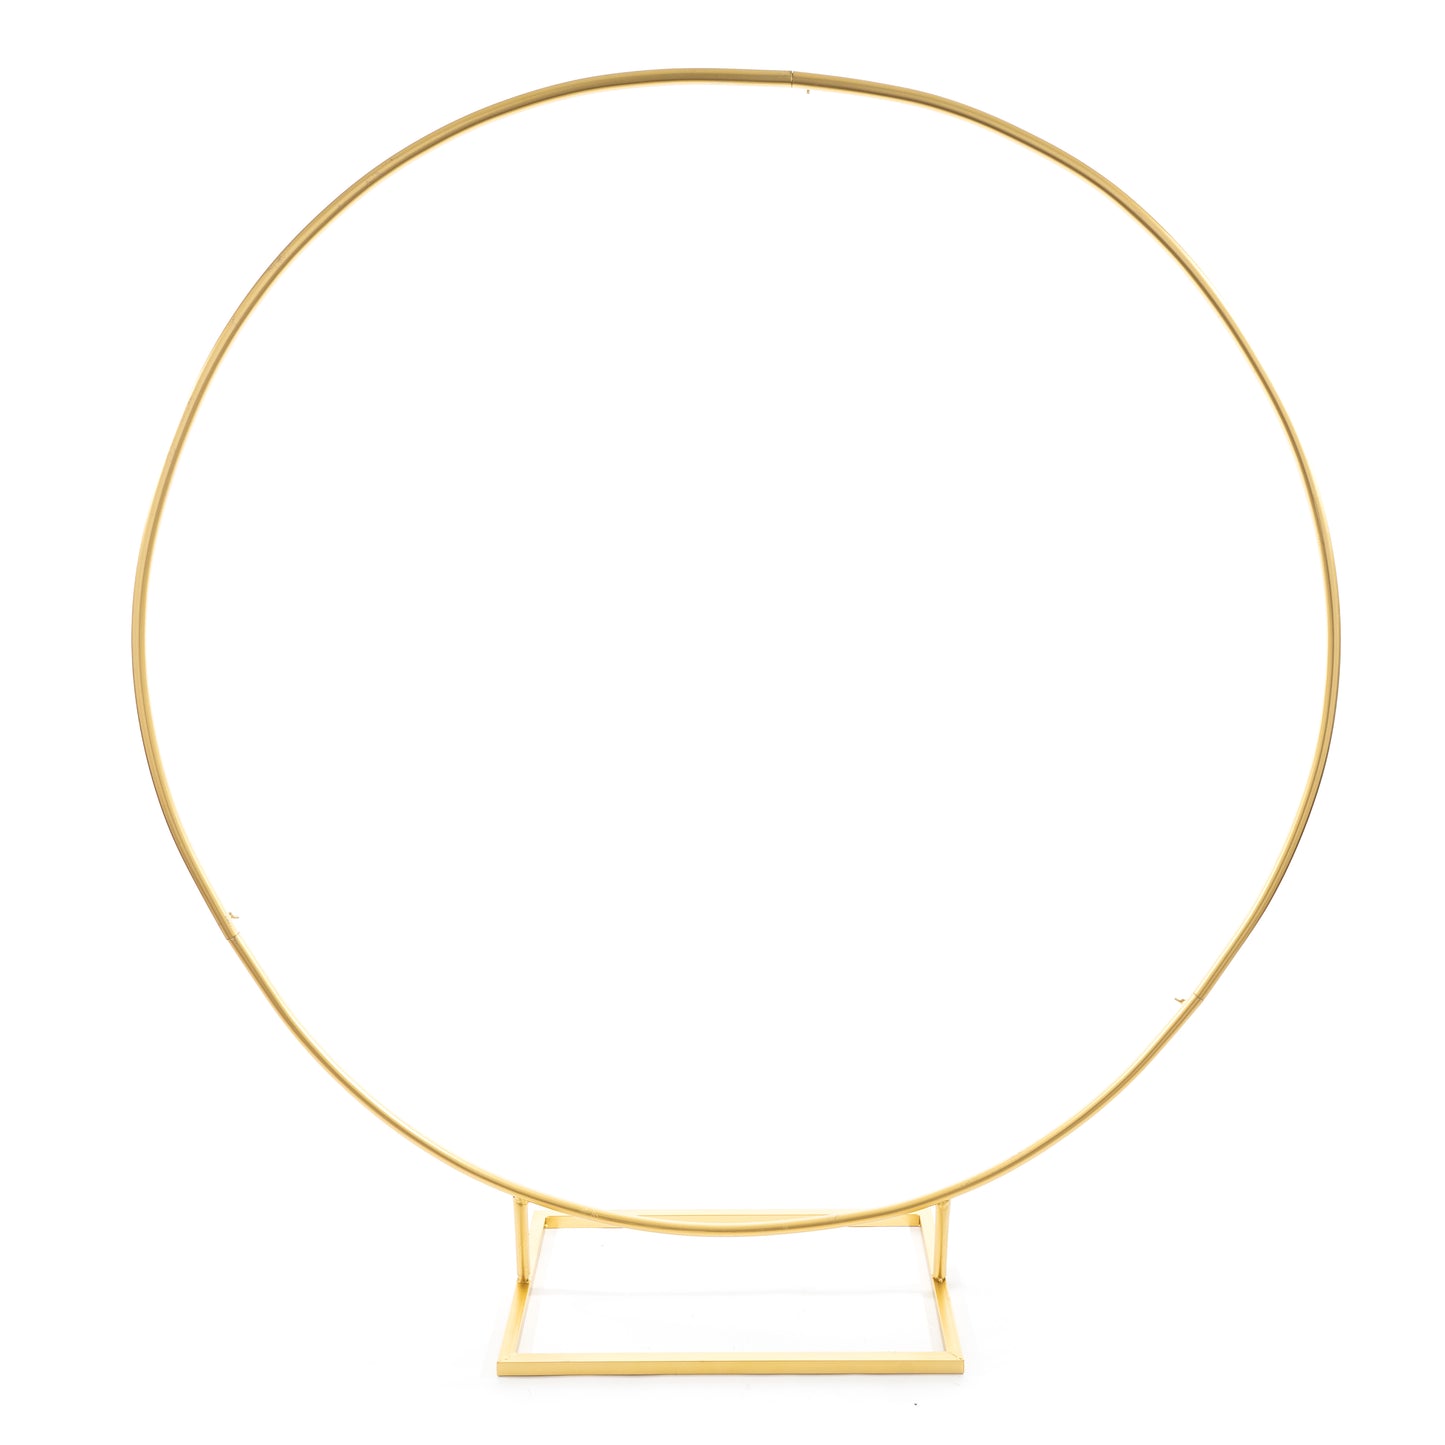 84" GOLD CIRCLE BACKDROP STAND 1CT